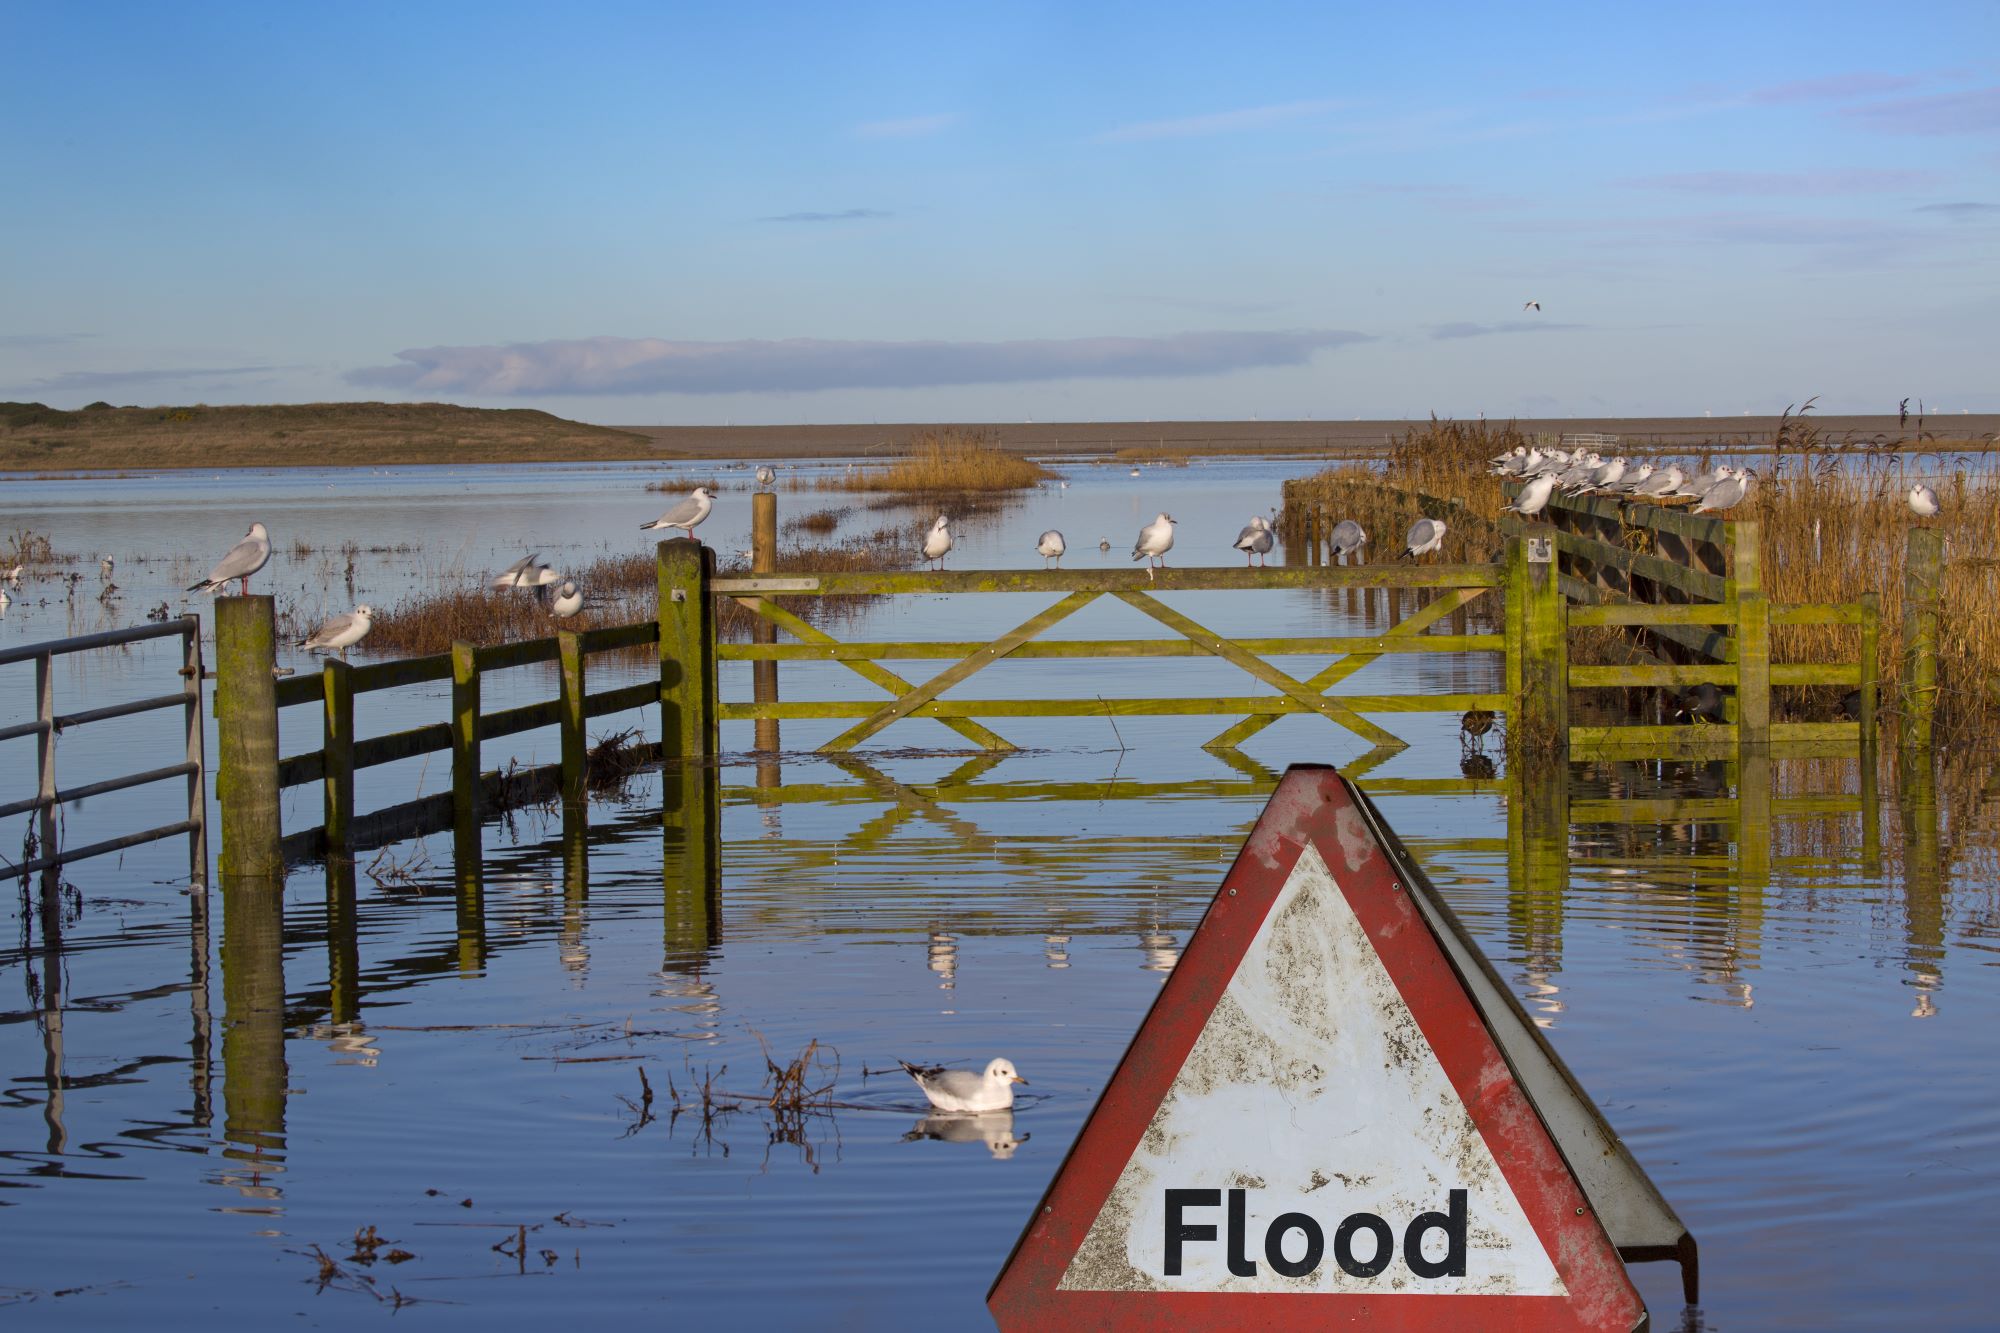 Flooded plain with triangle Flood warning sign